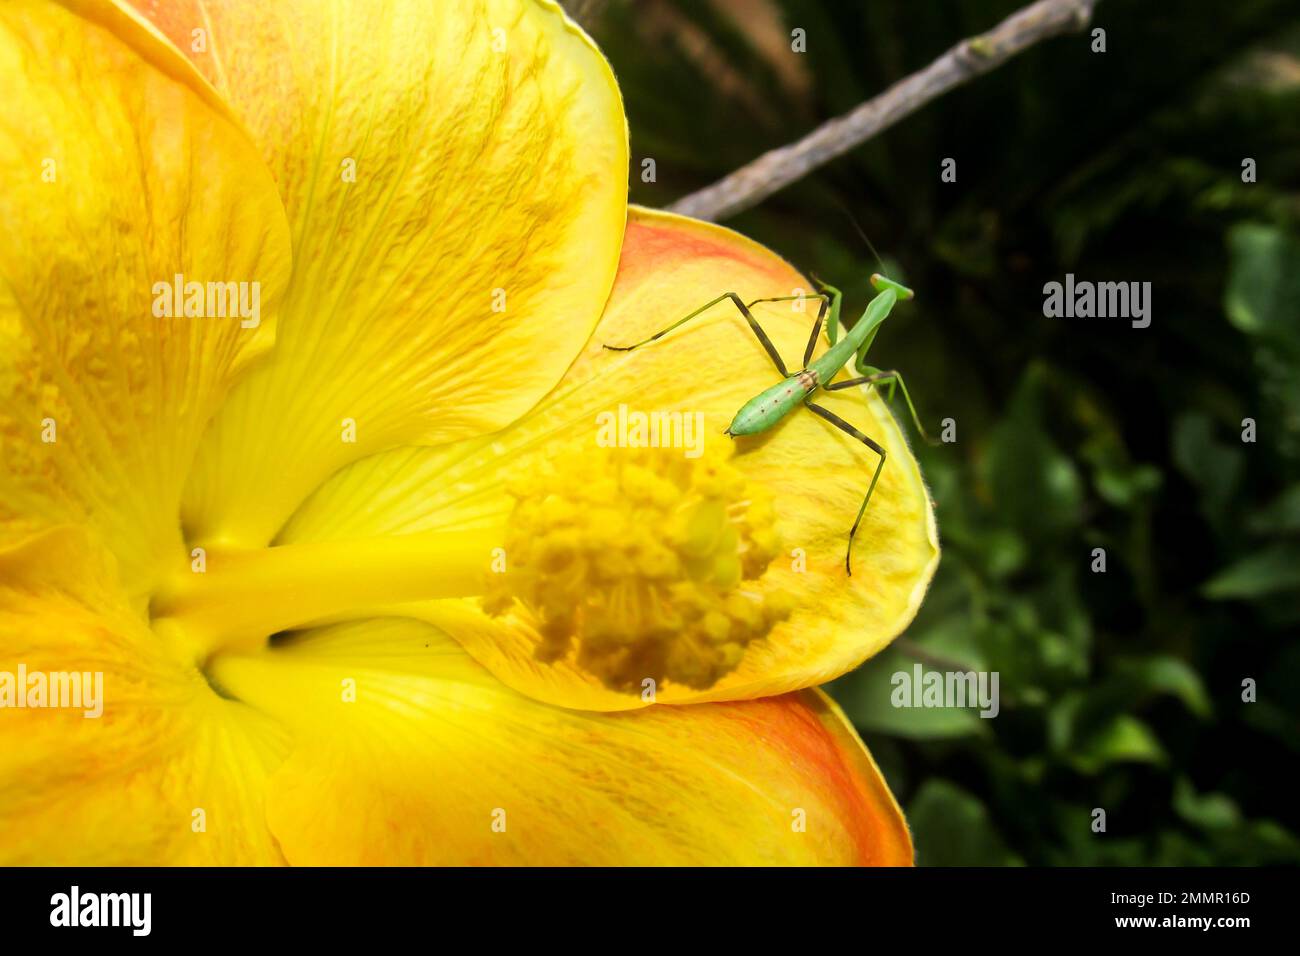 A small nymph of an African Praying Mantis on a yellow flower of an Hibiscus. Stock Photo